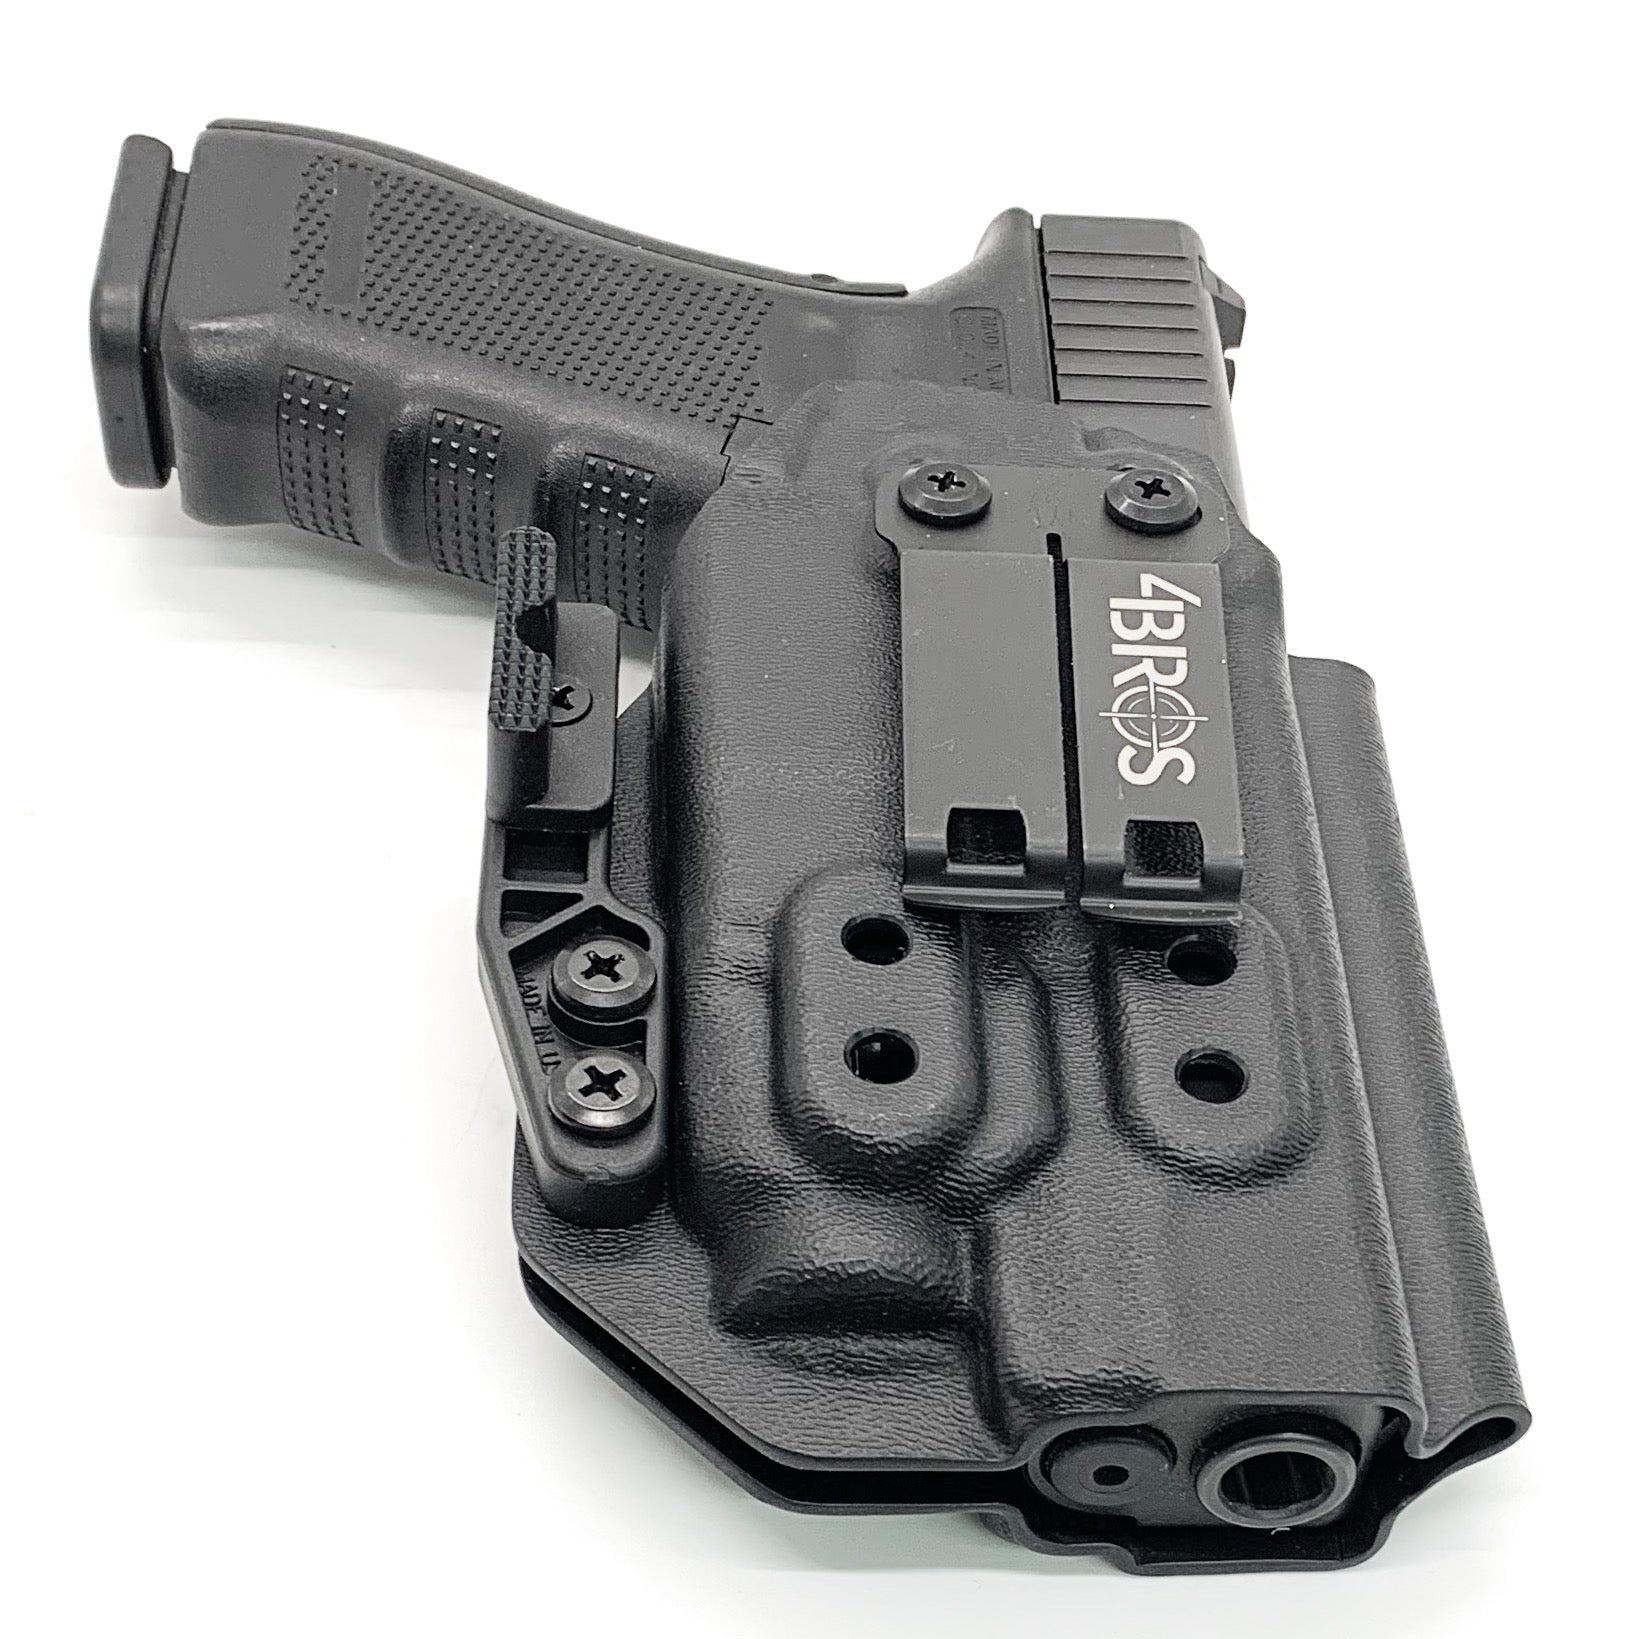 For the Best Inside Waistband IWB AIWB Appendix Kydex holster designed to fit the Glock Gen 5 17, 17 MOS, 47, and 47 MOS, with the Streamlight TLR-7 or TLR-7A light, shop Four Brothers Holsters. Adjustable retention, Open Muzzle, Cleared for red dot optics, & 3/8" suppressor height sights. Proudly Made in the USA 